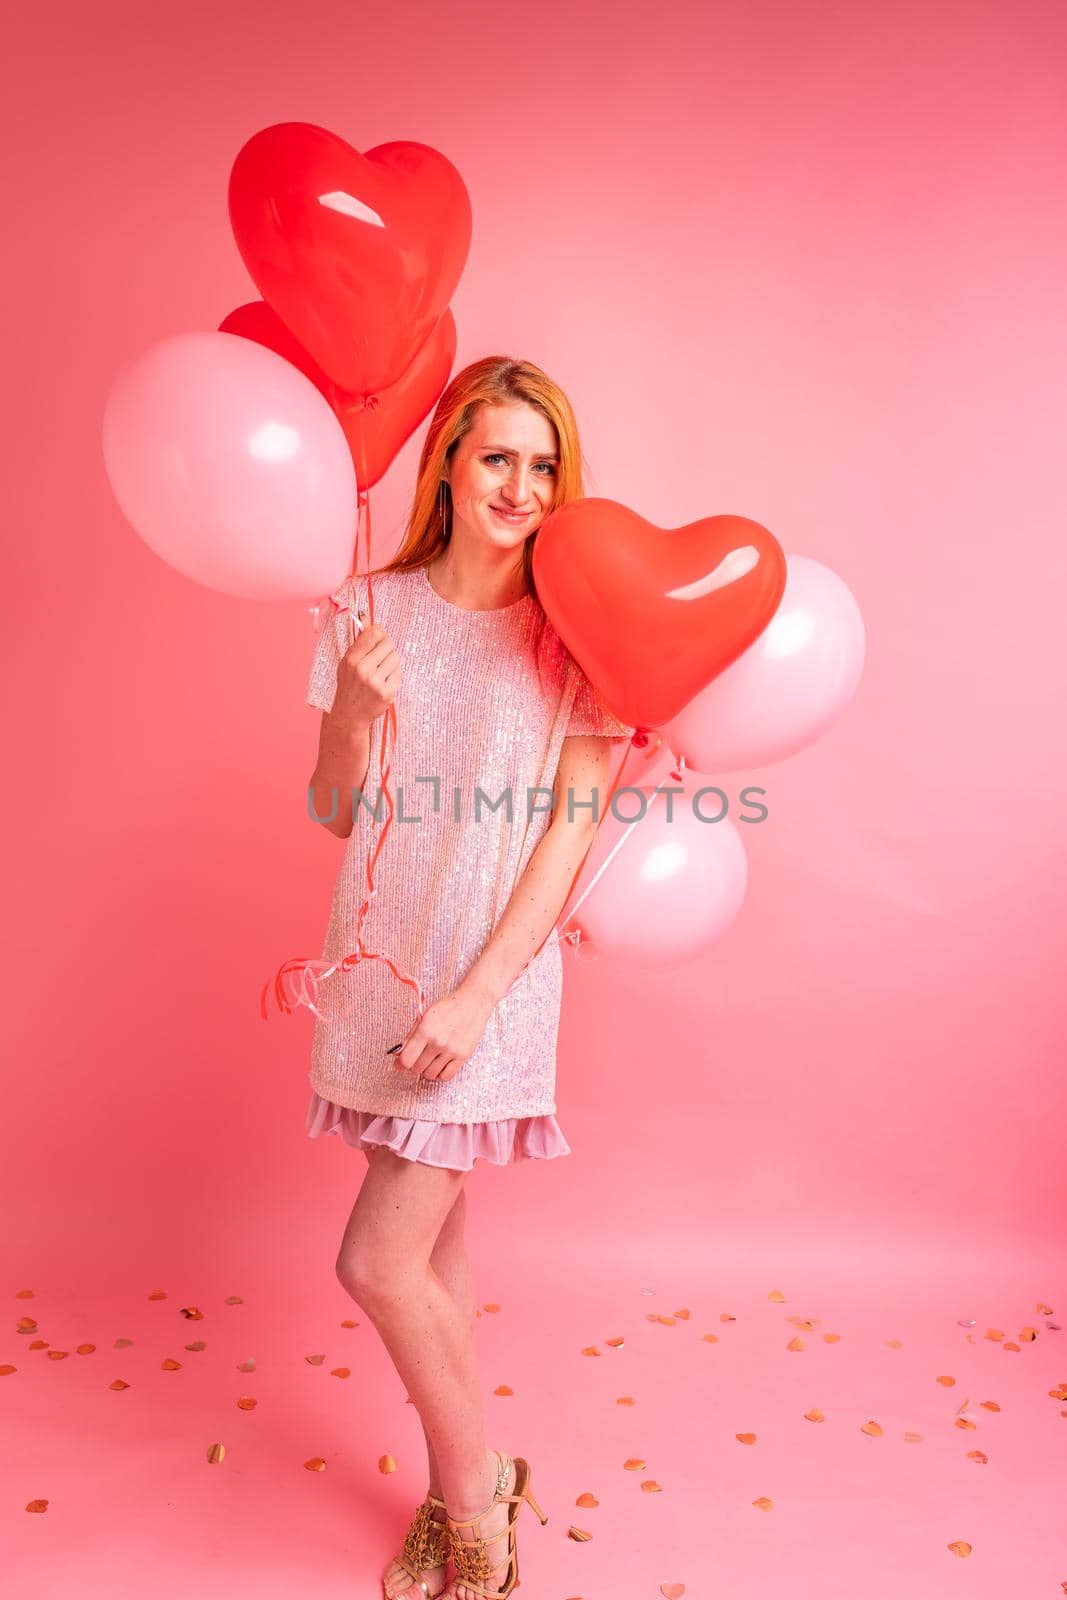 Beautiful redhead girl with red heart baloon posing. Happy Valentine's Day concept. Studio photo of beautiful ginger girl dancing on pink background.